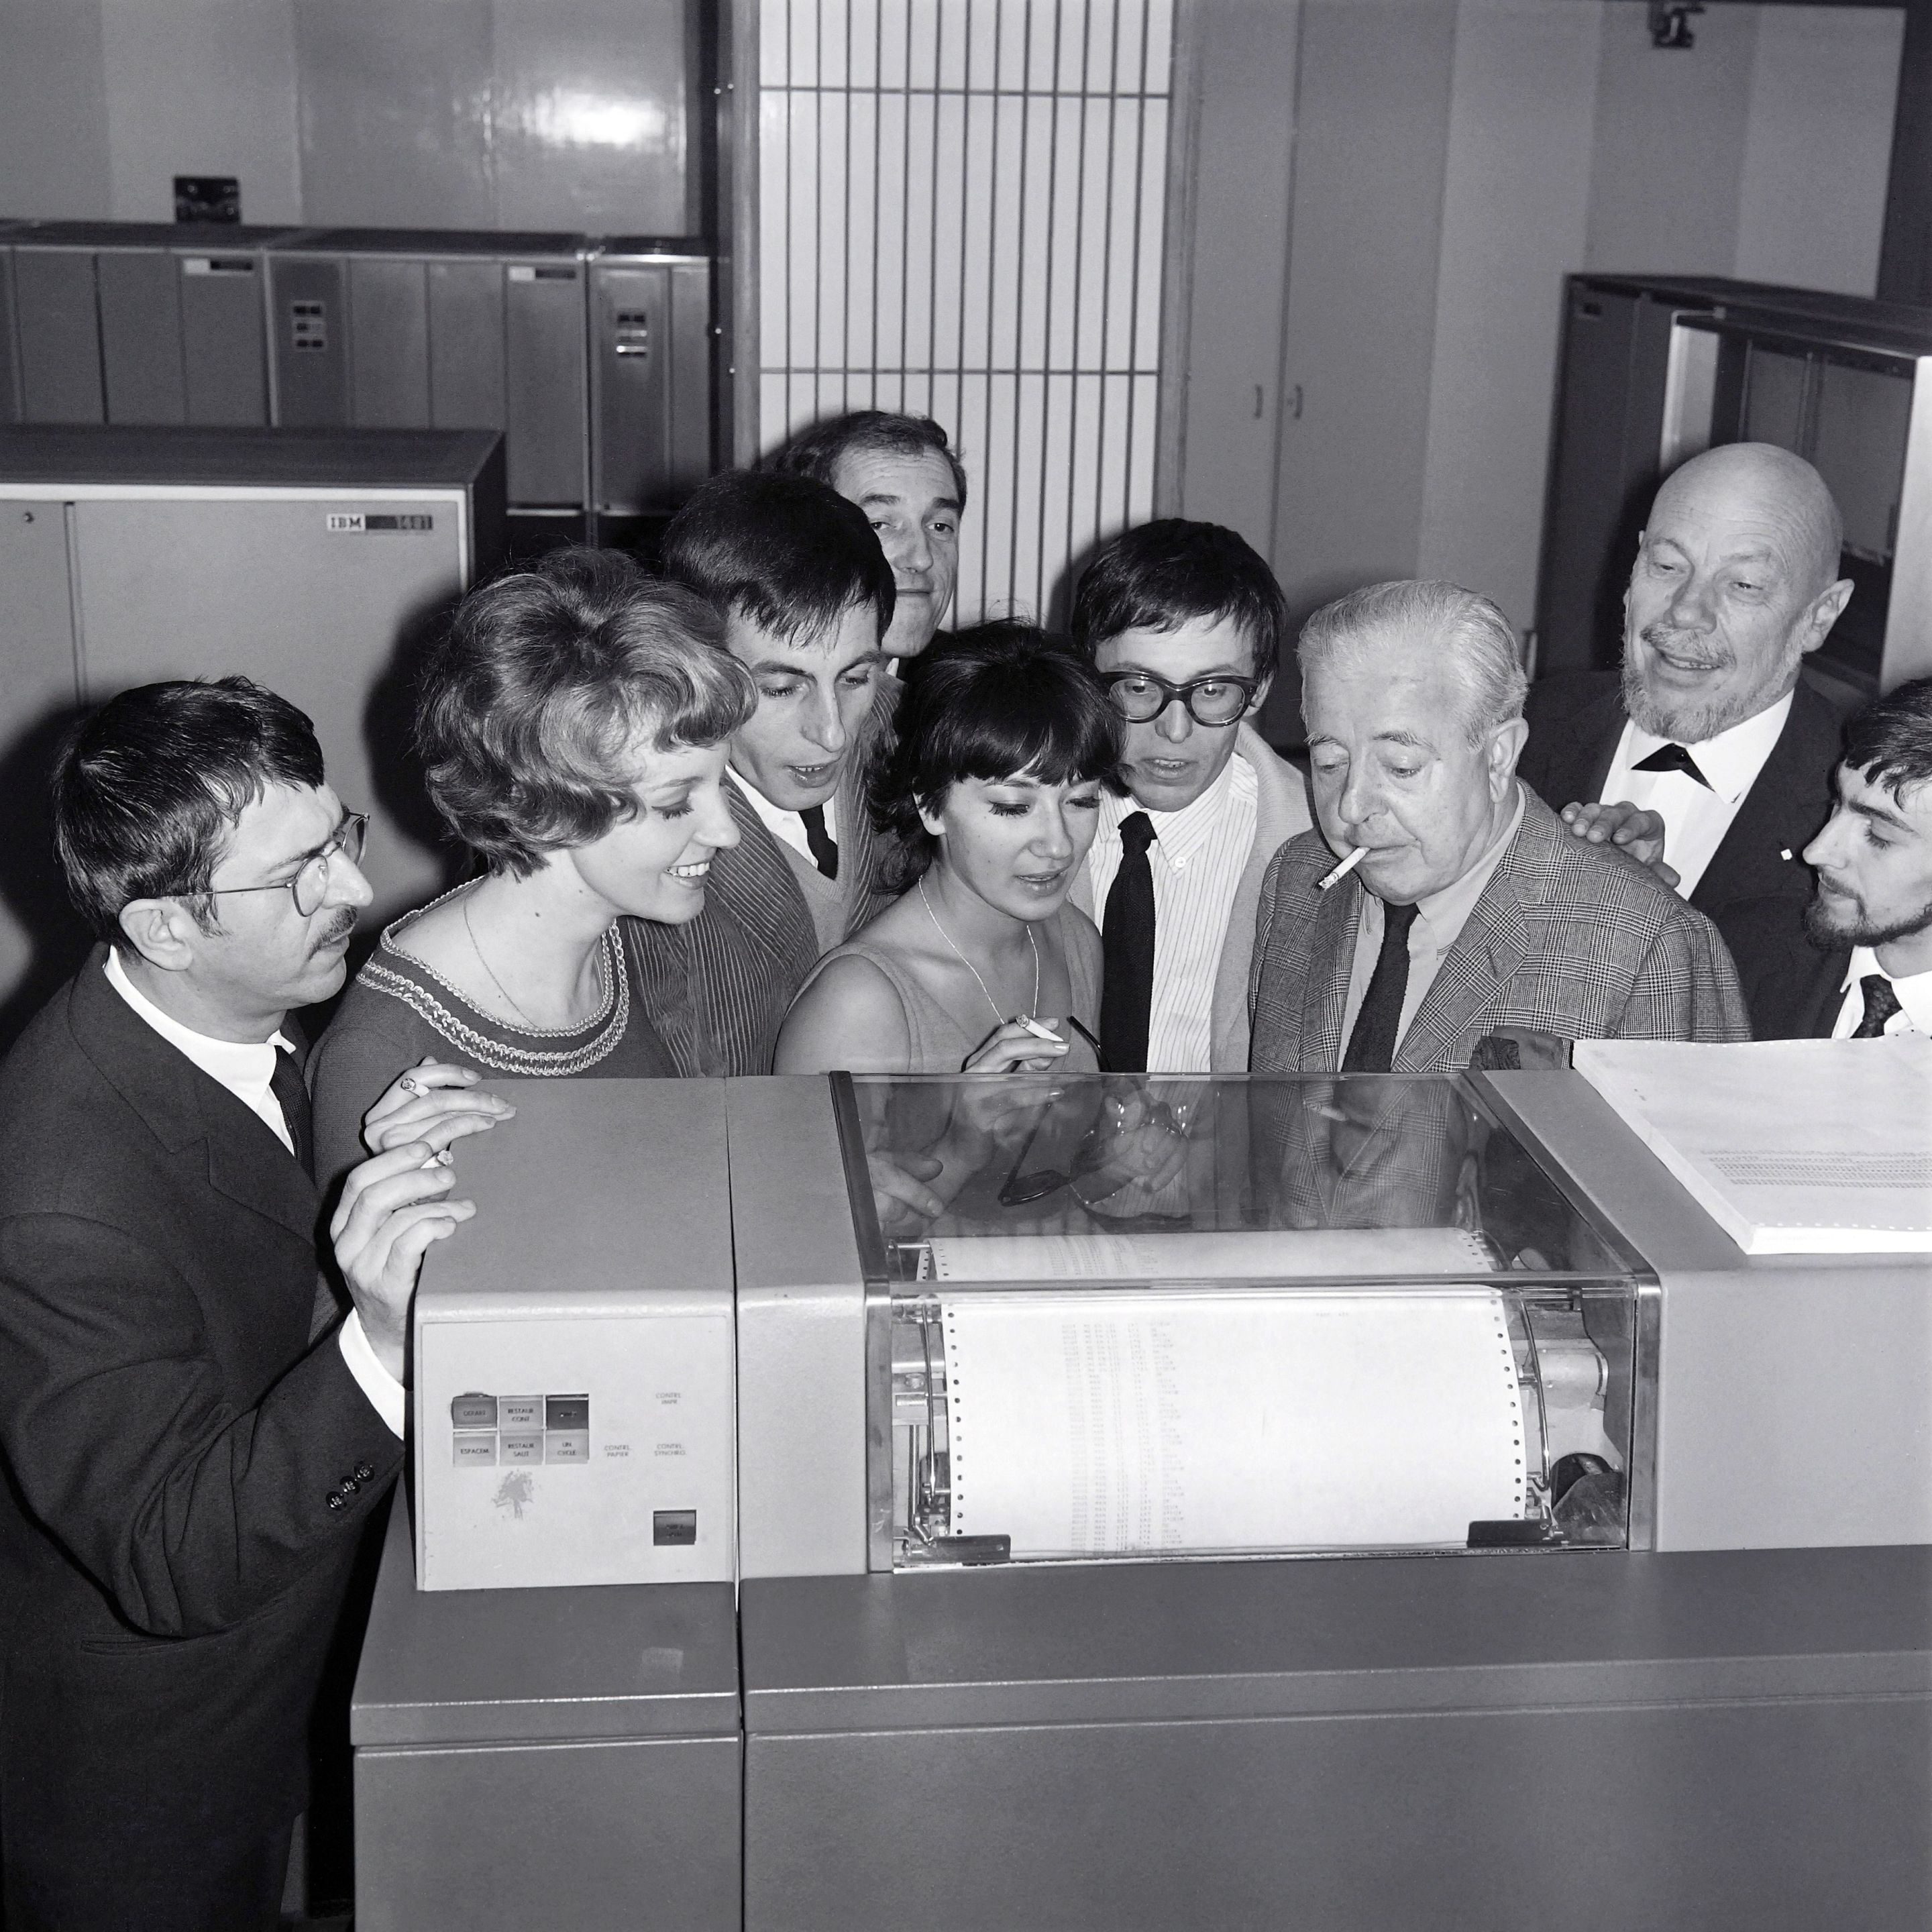 (From L to R) Roger Riffard, Lise Granvel, Armand Babel, Jean-Pierre Dutour, Catherine Sotha, Romain Bouteille, Leo Campion, Jacques Prevert and Jacques Barbier look at the IBM computer which will find the title of the new play written by Romain Bouteille (4thR with glasses), on November 13, 1965 in Paris. (Photo by - / AFP) (